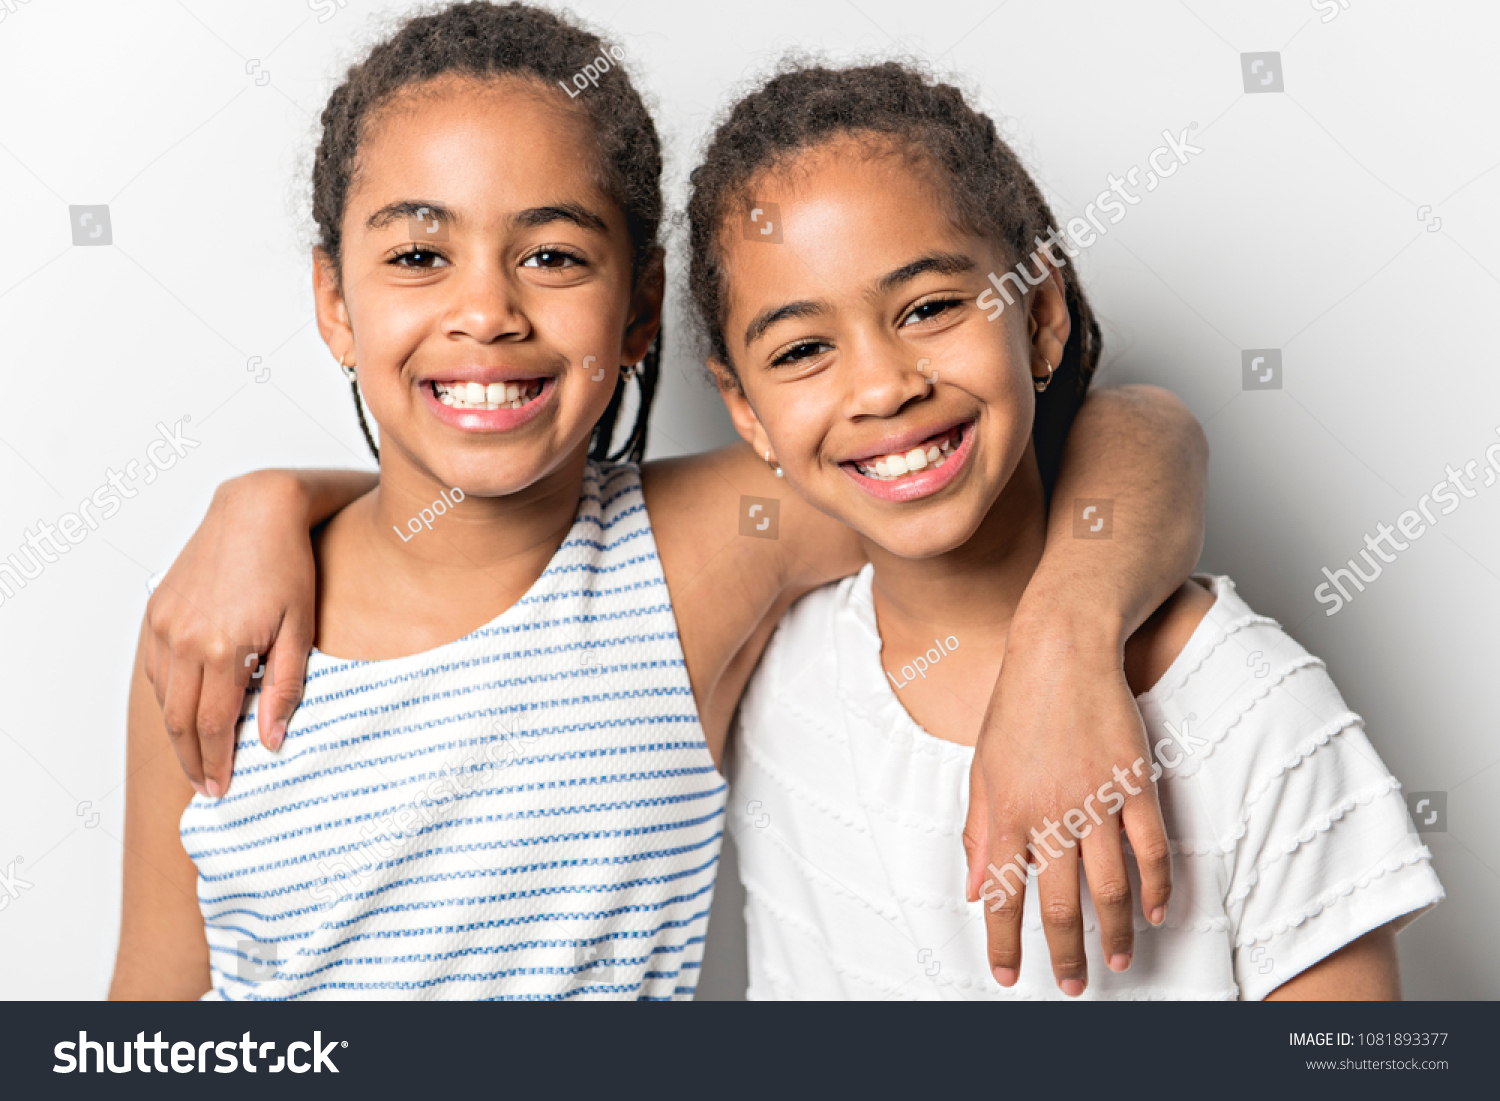 Adorable African Twin Little Girls On Stock Photo 1081893377 | Shutterstock